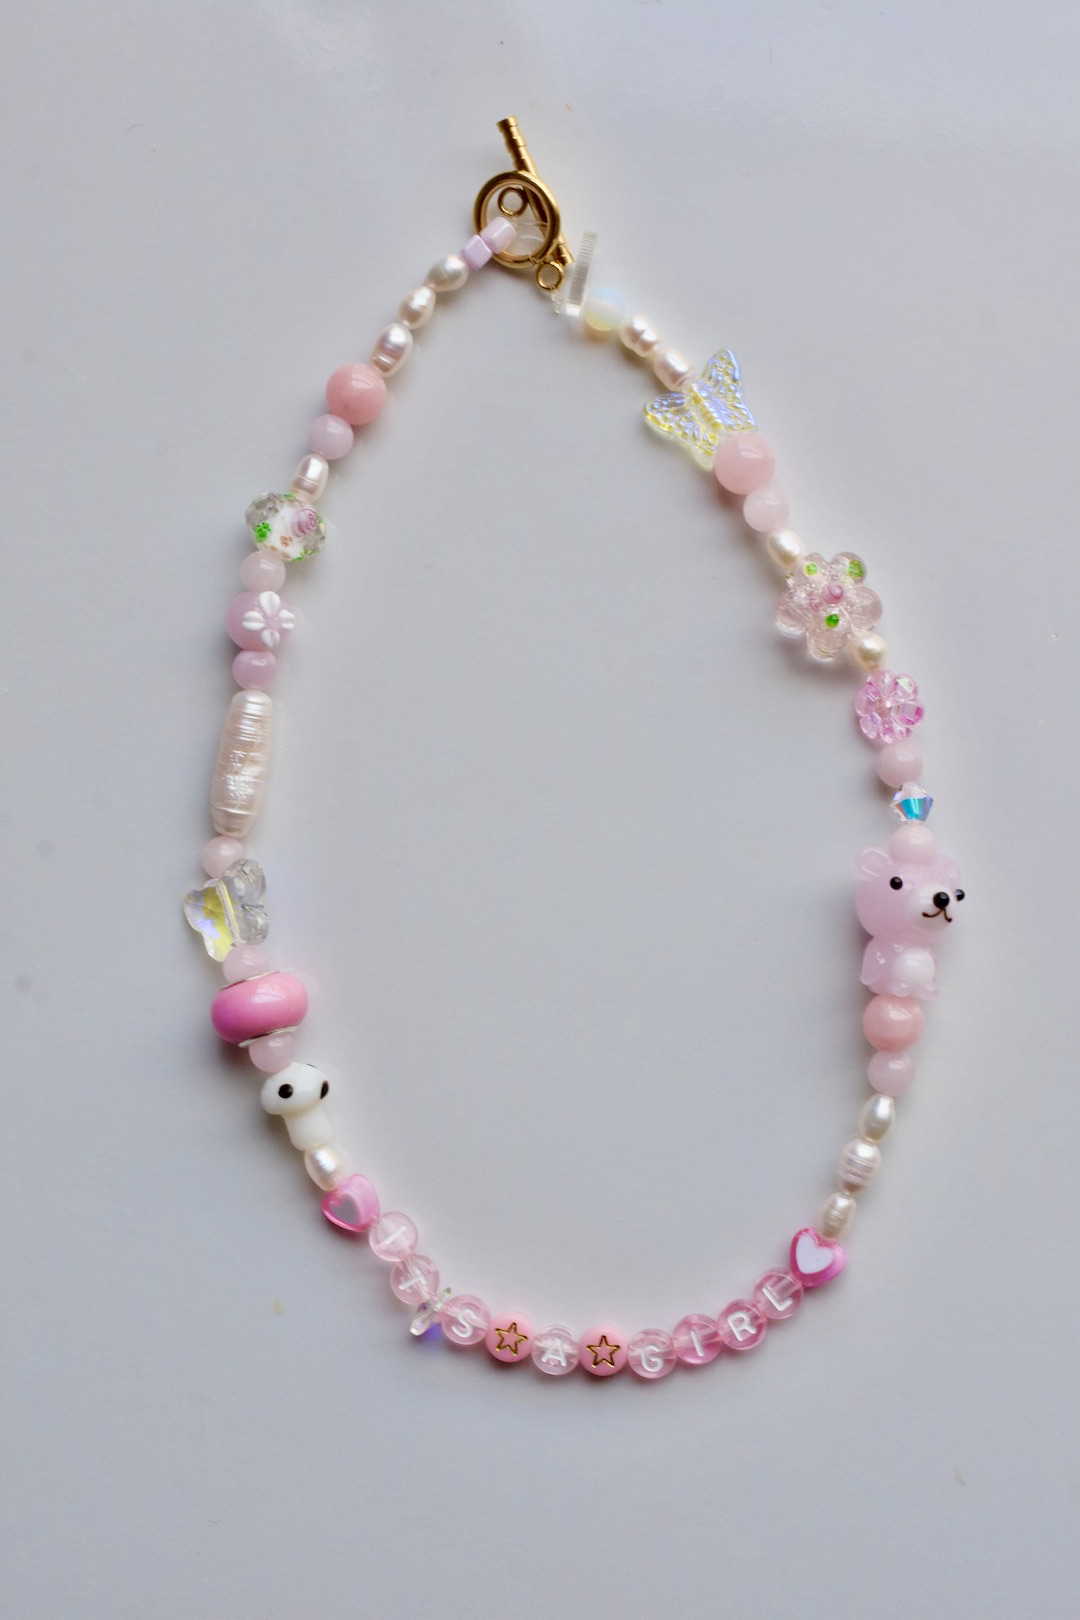 It's a girl pink choker necklace with precious beads